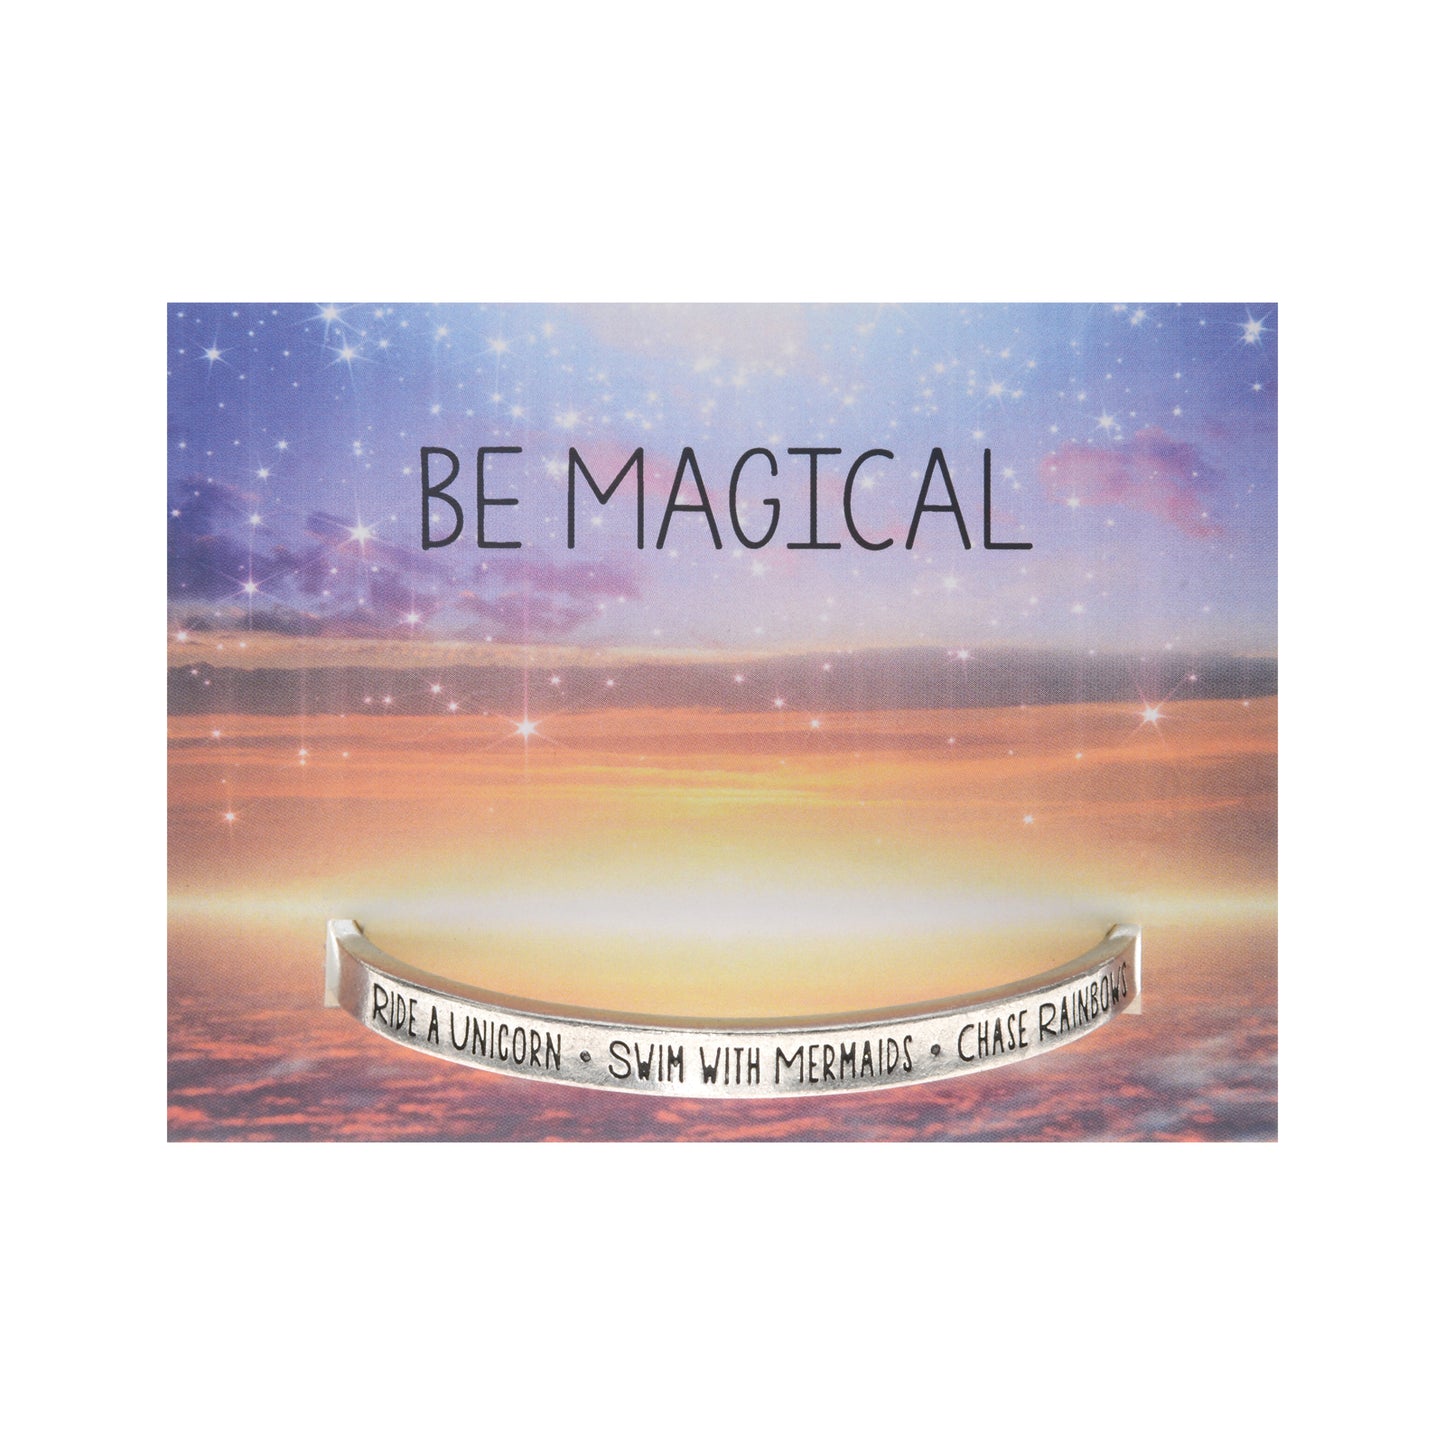 Be Magical - Ride a Unicorn, Swim with Mermaids Quotable Cuff Bracelet on backer card